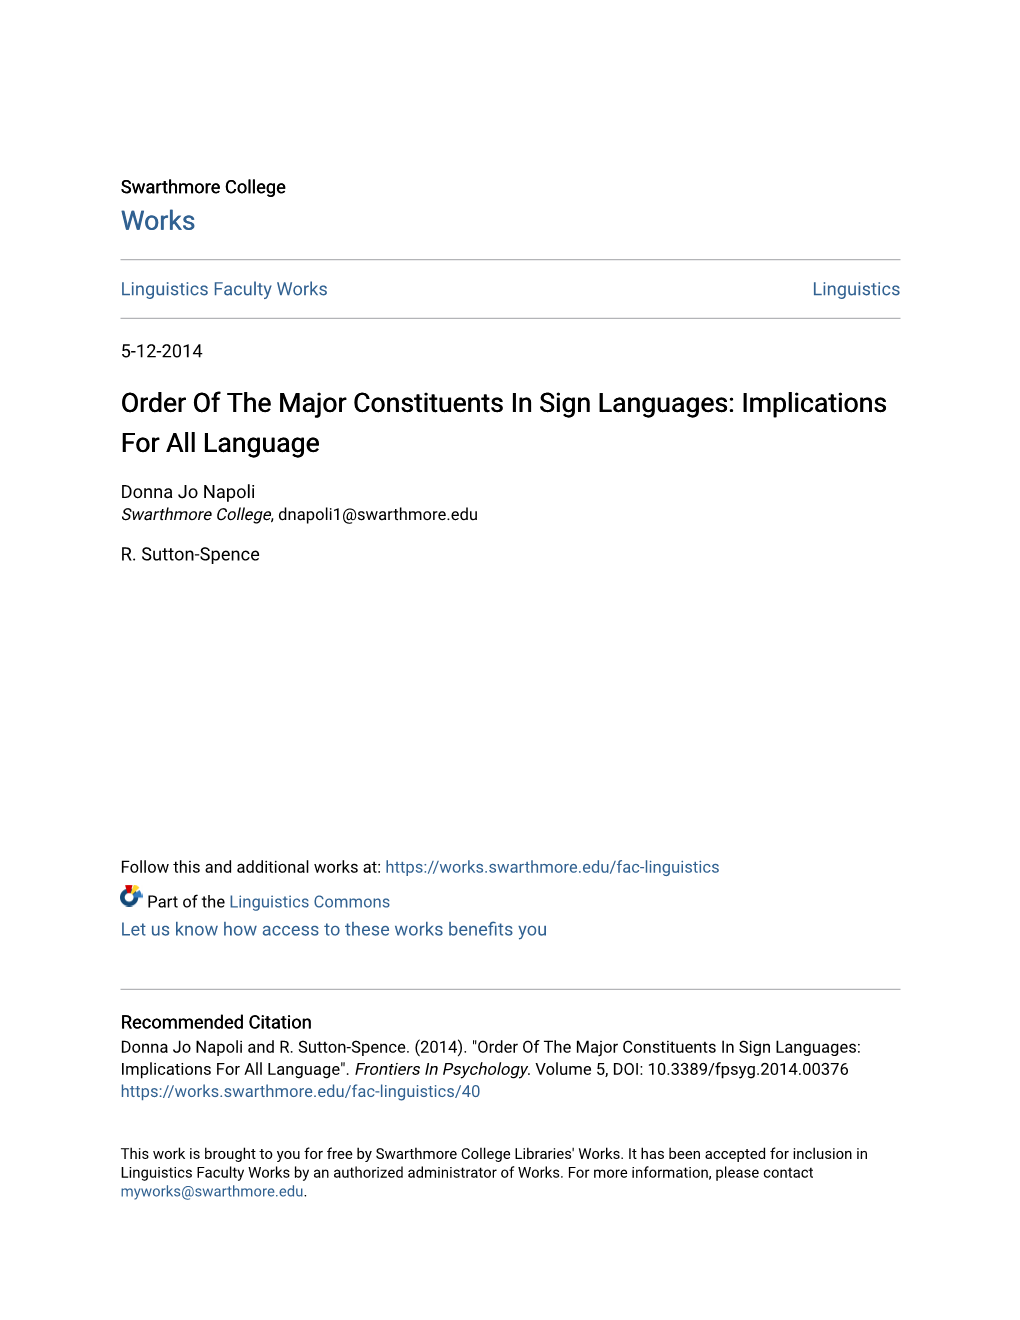 Order of the Major Constituents in Sign Languages: Implications for All Language